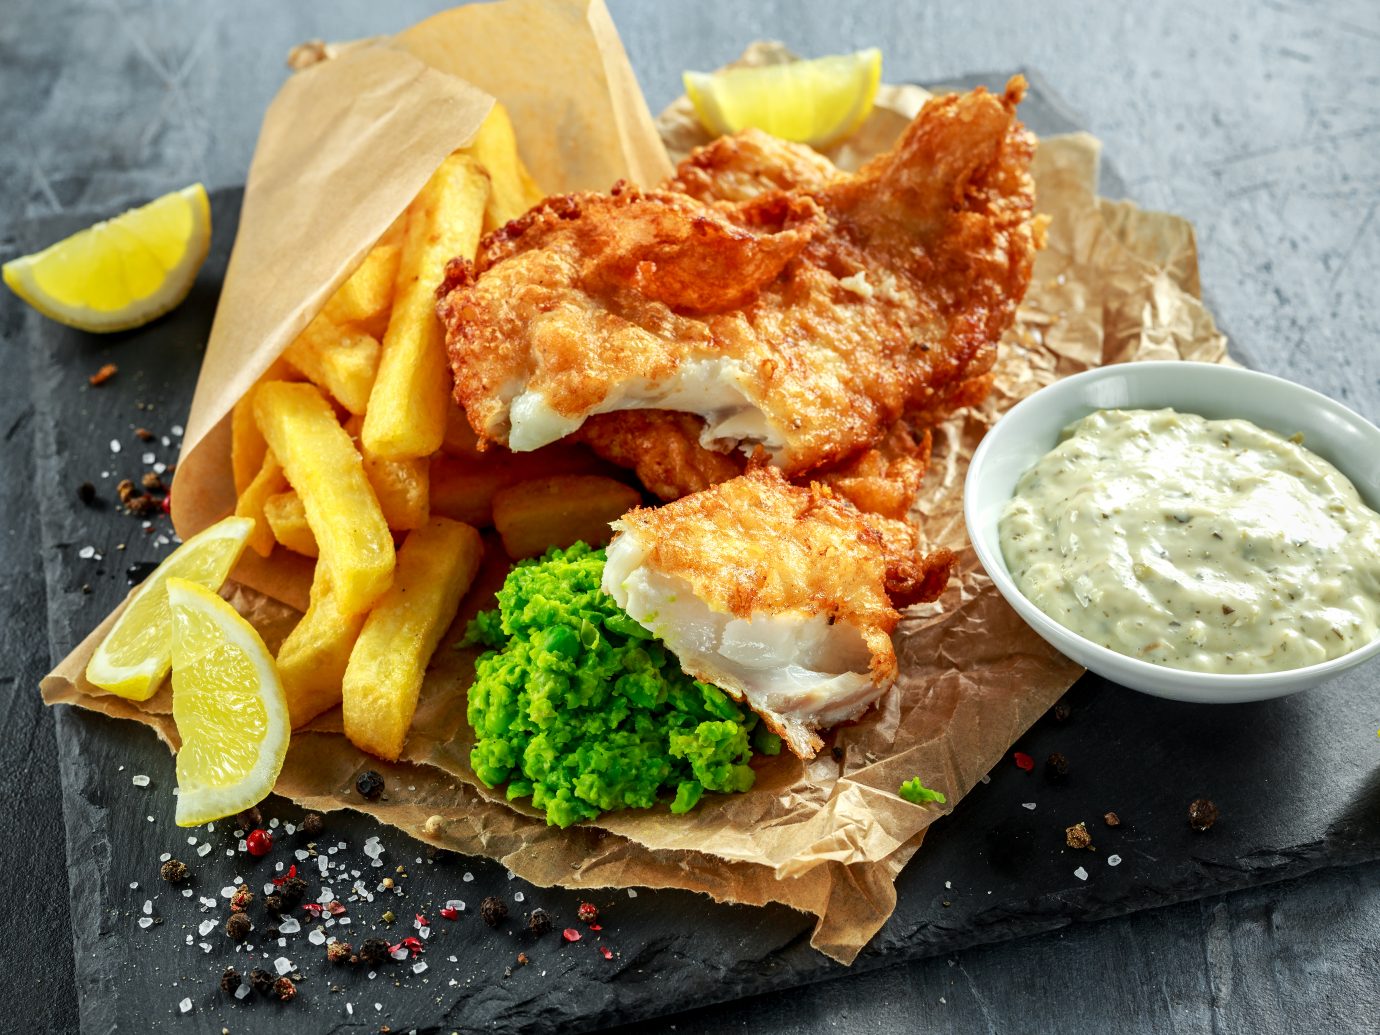 British Traditional Fish and chips with mashed peas, tartar sauce on crumpled paper